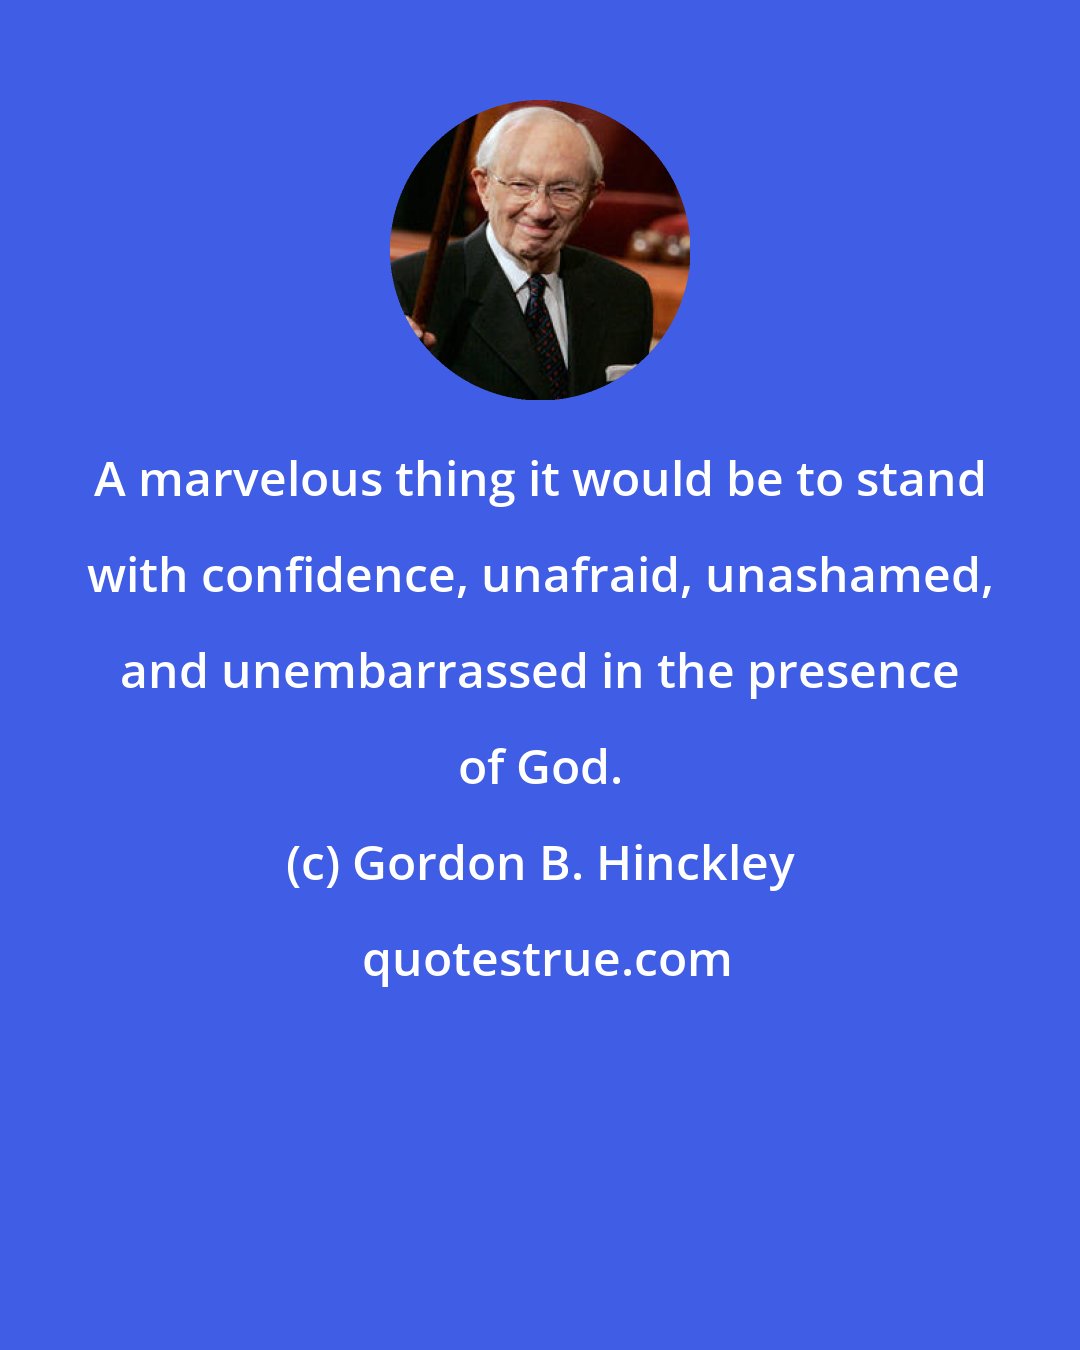 Gordon B. Hinckley: A marvelous thing it would be to stand with confidence, unafraid, unashamed, and unembarrassed in the presence of God.